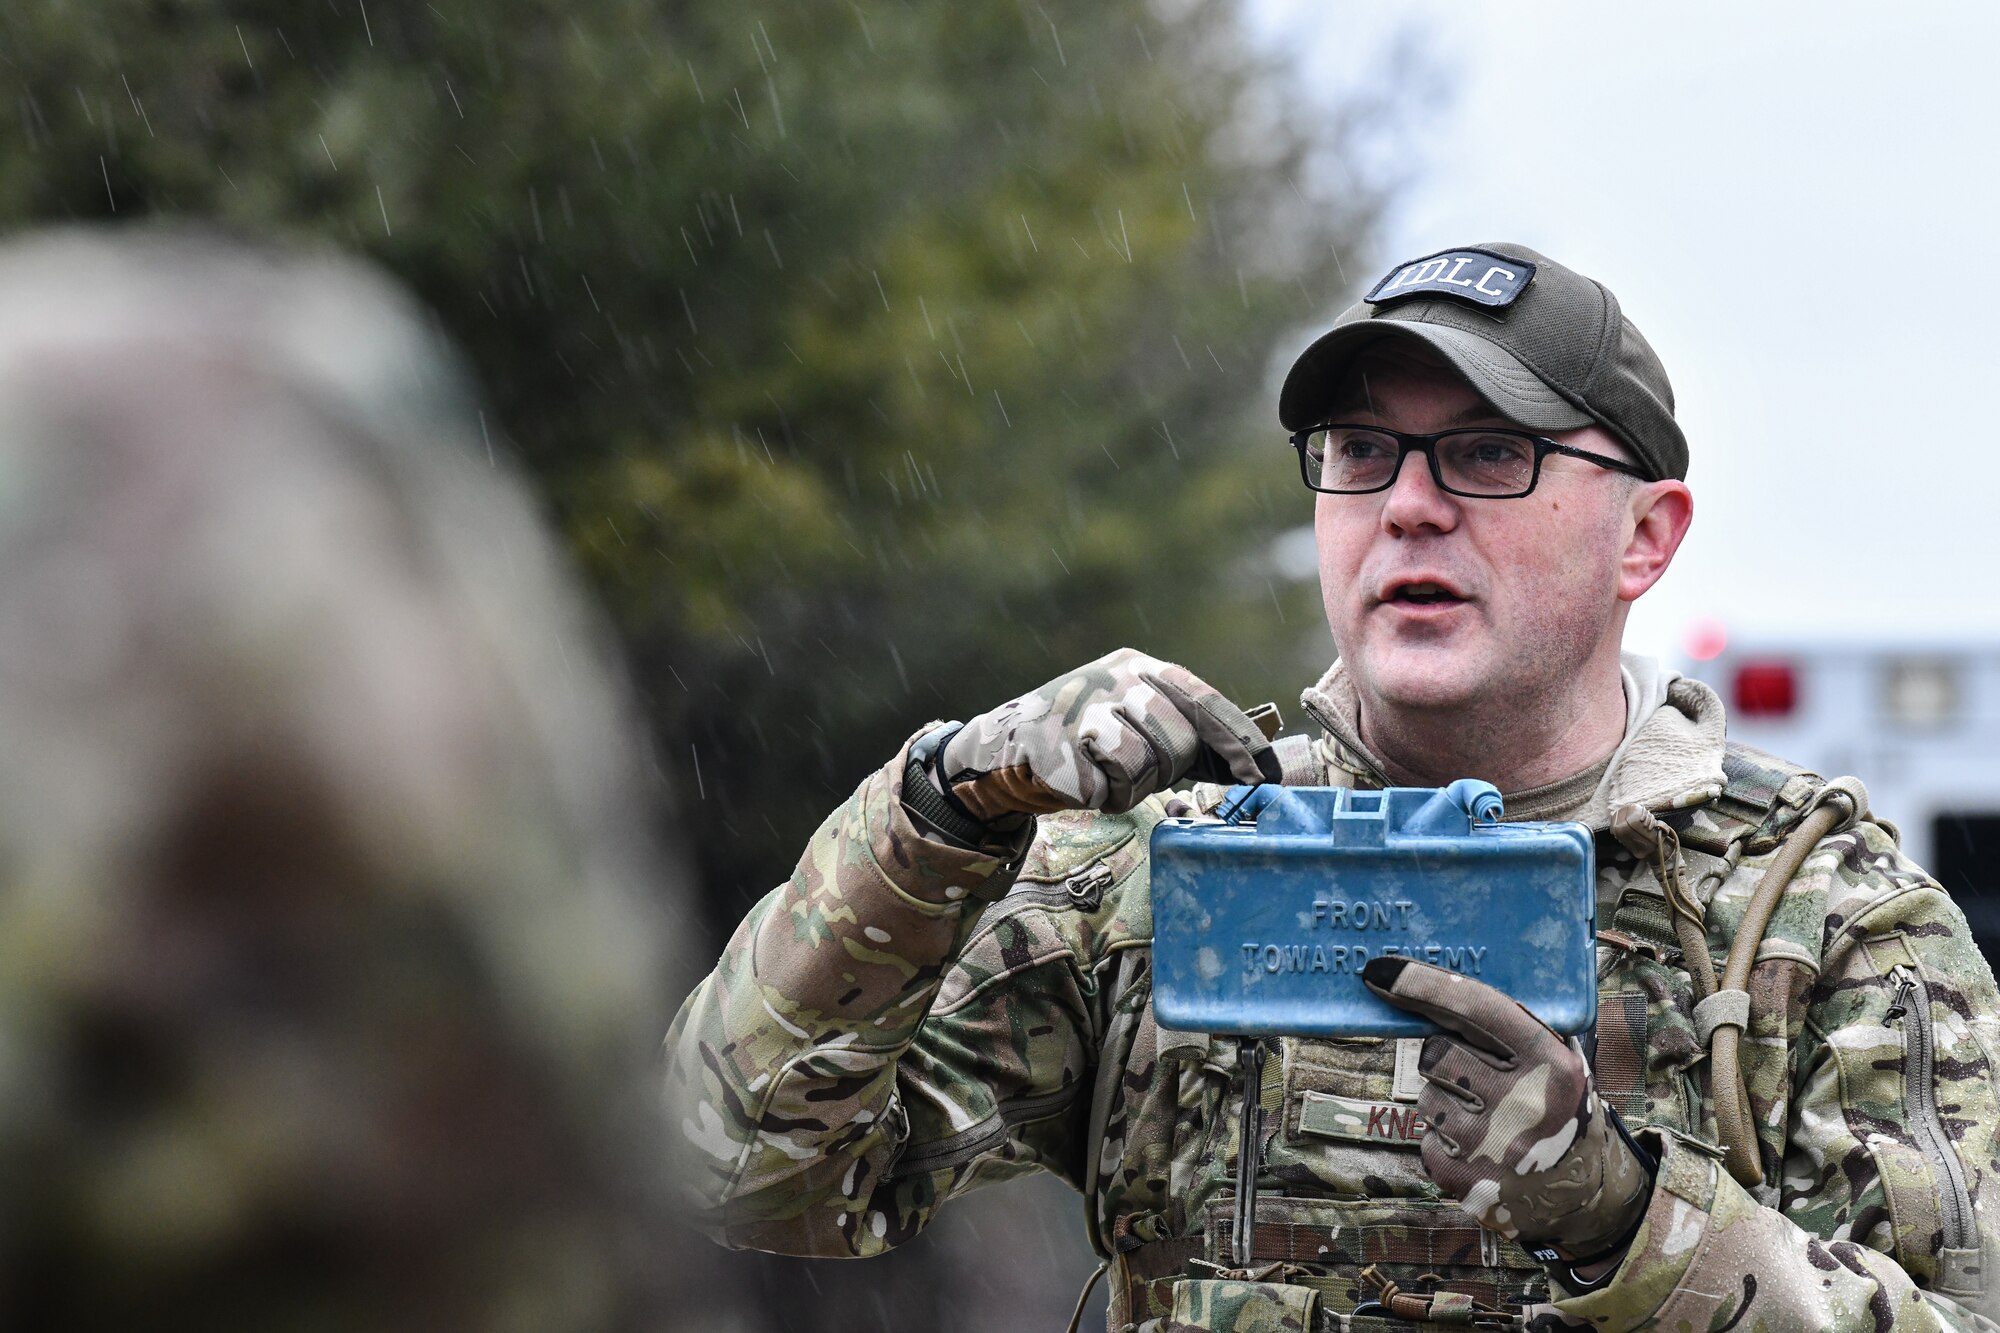 Senior Master Sgt. Jason Knepper, Air Force Reserve Command security forces training manager, demonstrates how to detonate a claymore on March 17, 2023, at Camp James A. Garfield Joint Military Training Center, Ohio.